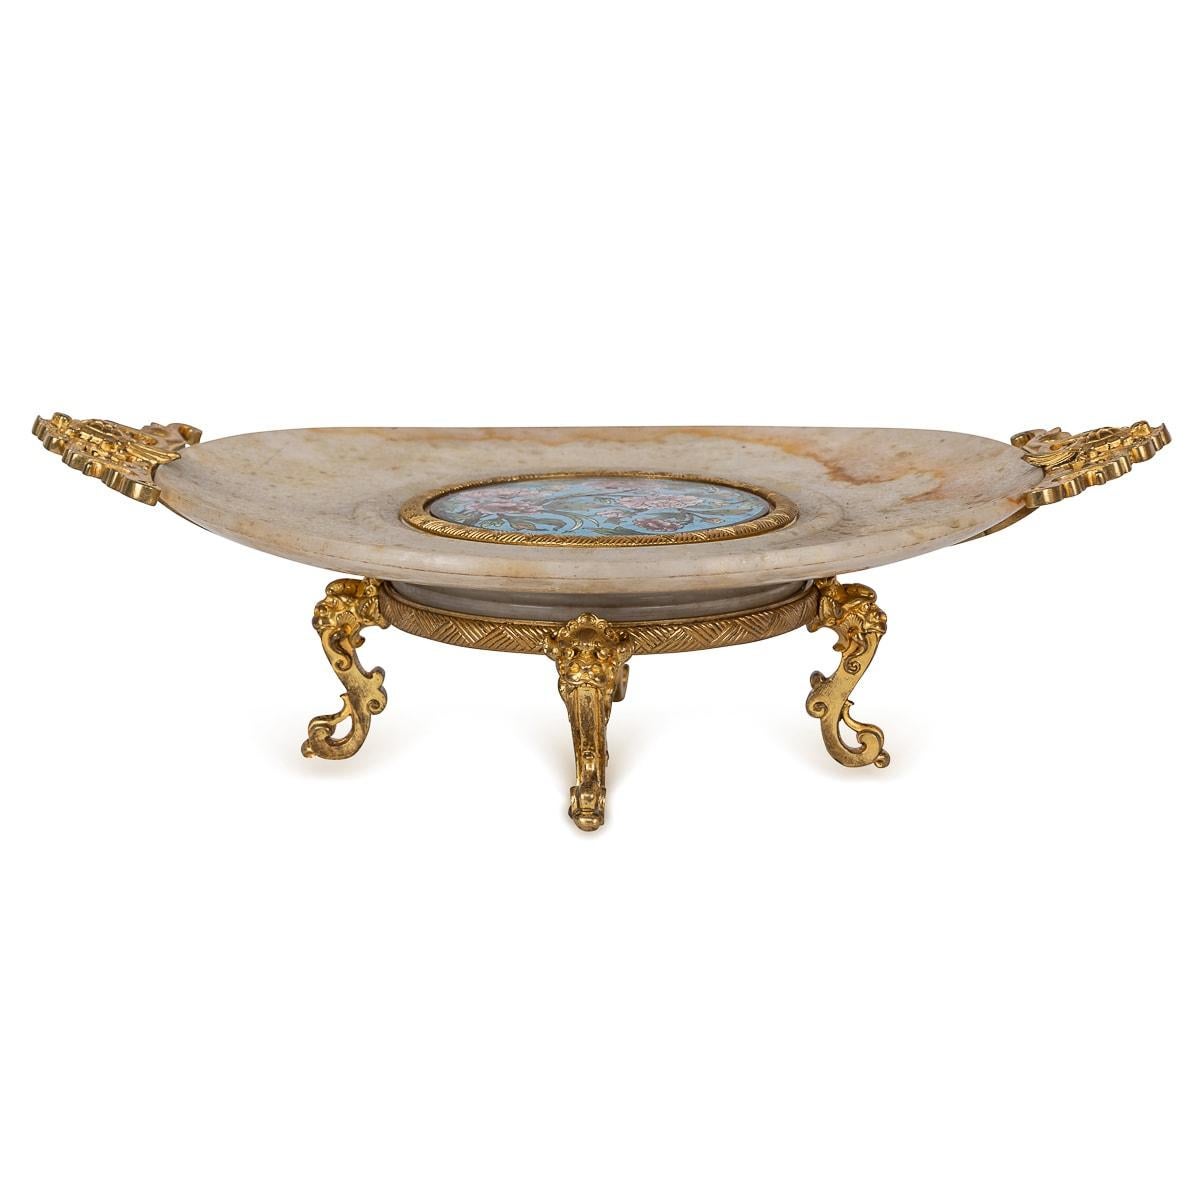 Late 19th Century 19th Century French Ormolu Mounted Onyx Marble & Enamel Centrepiece c.1880 For Sale